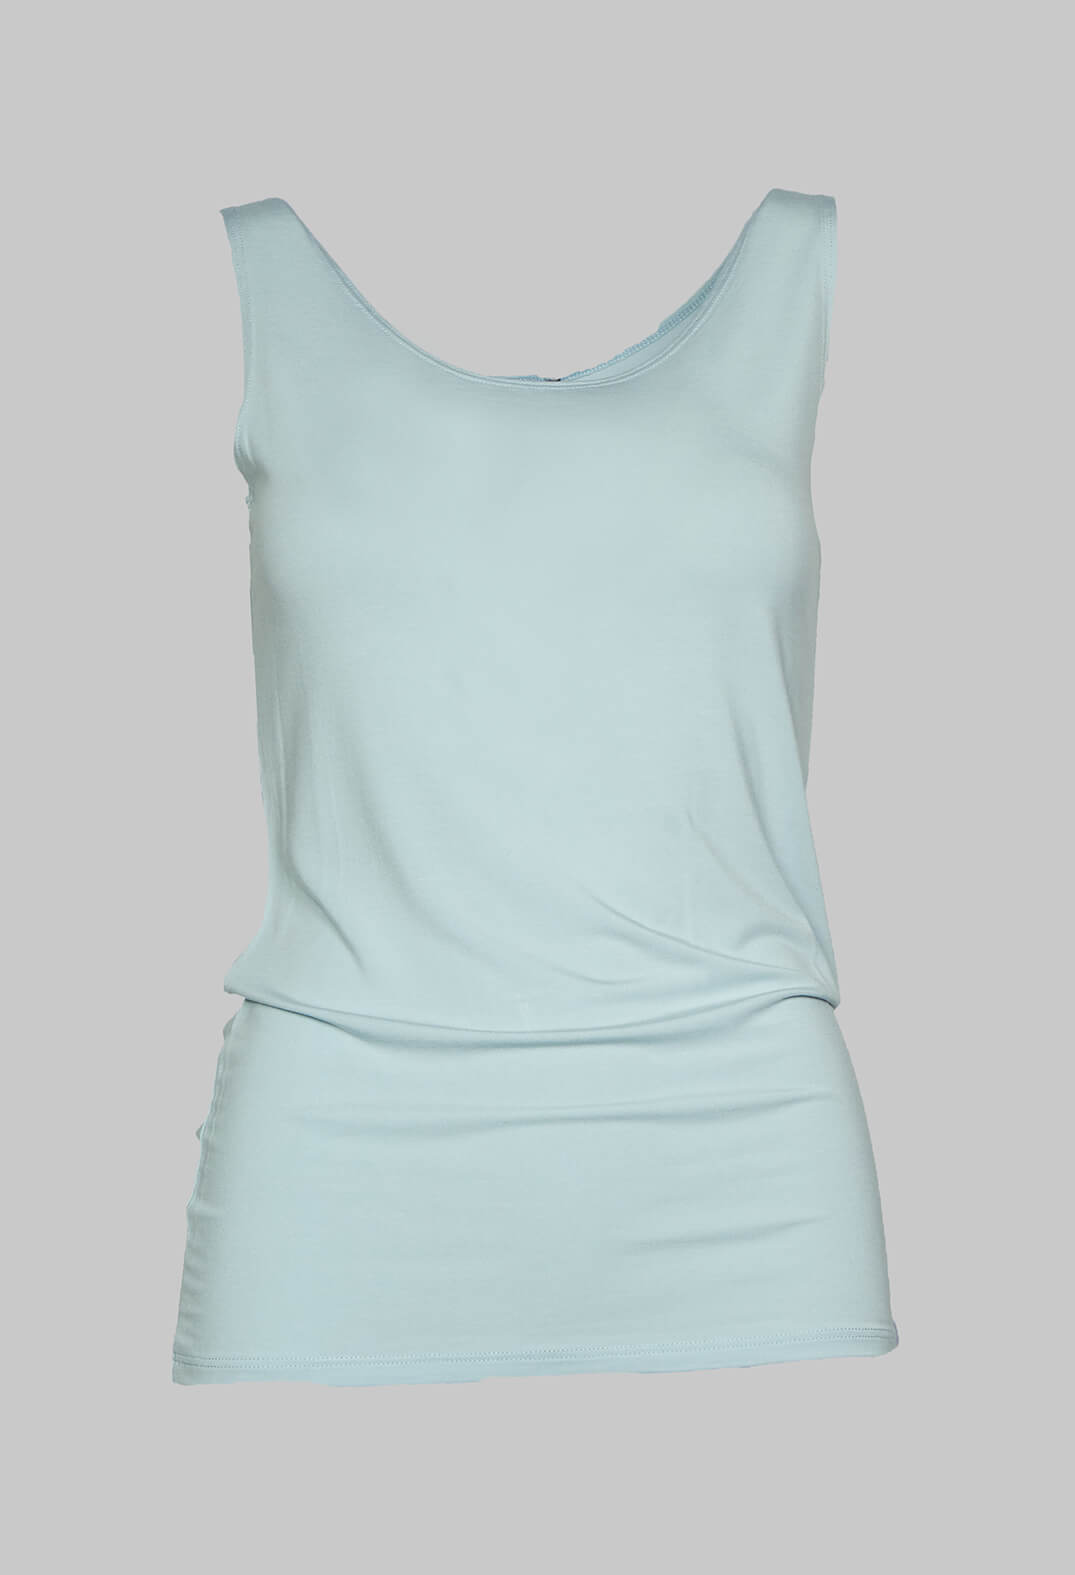 Anais T-Shirt in Baby Blue